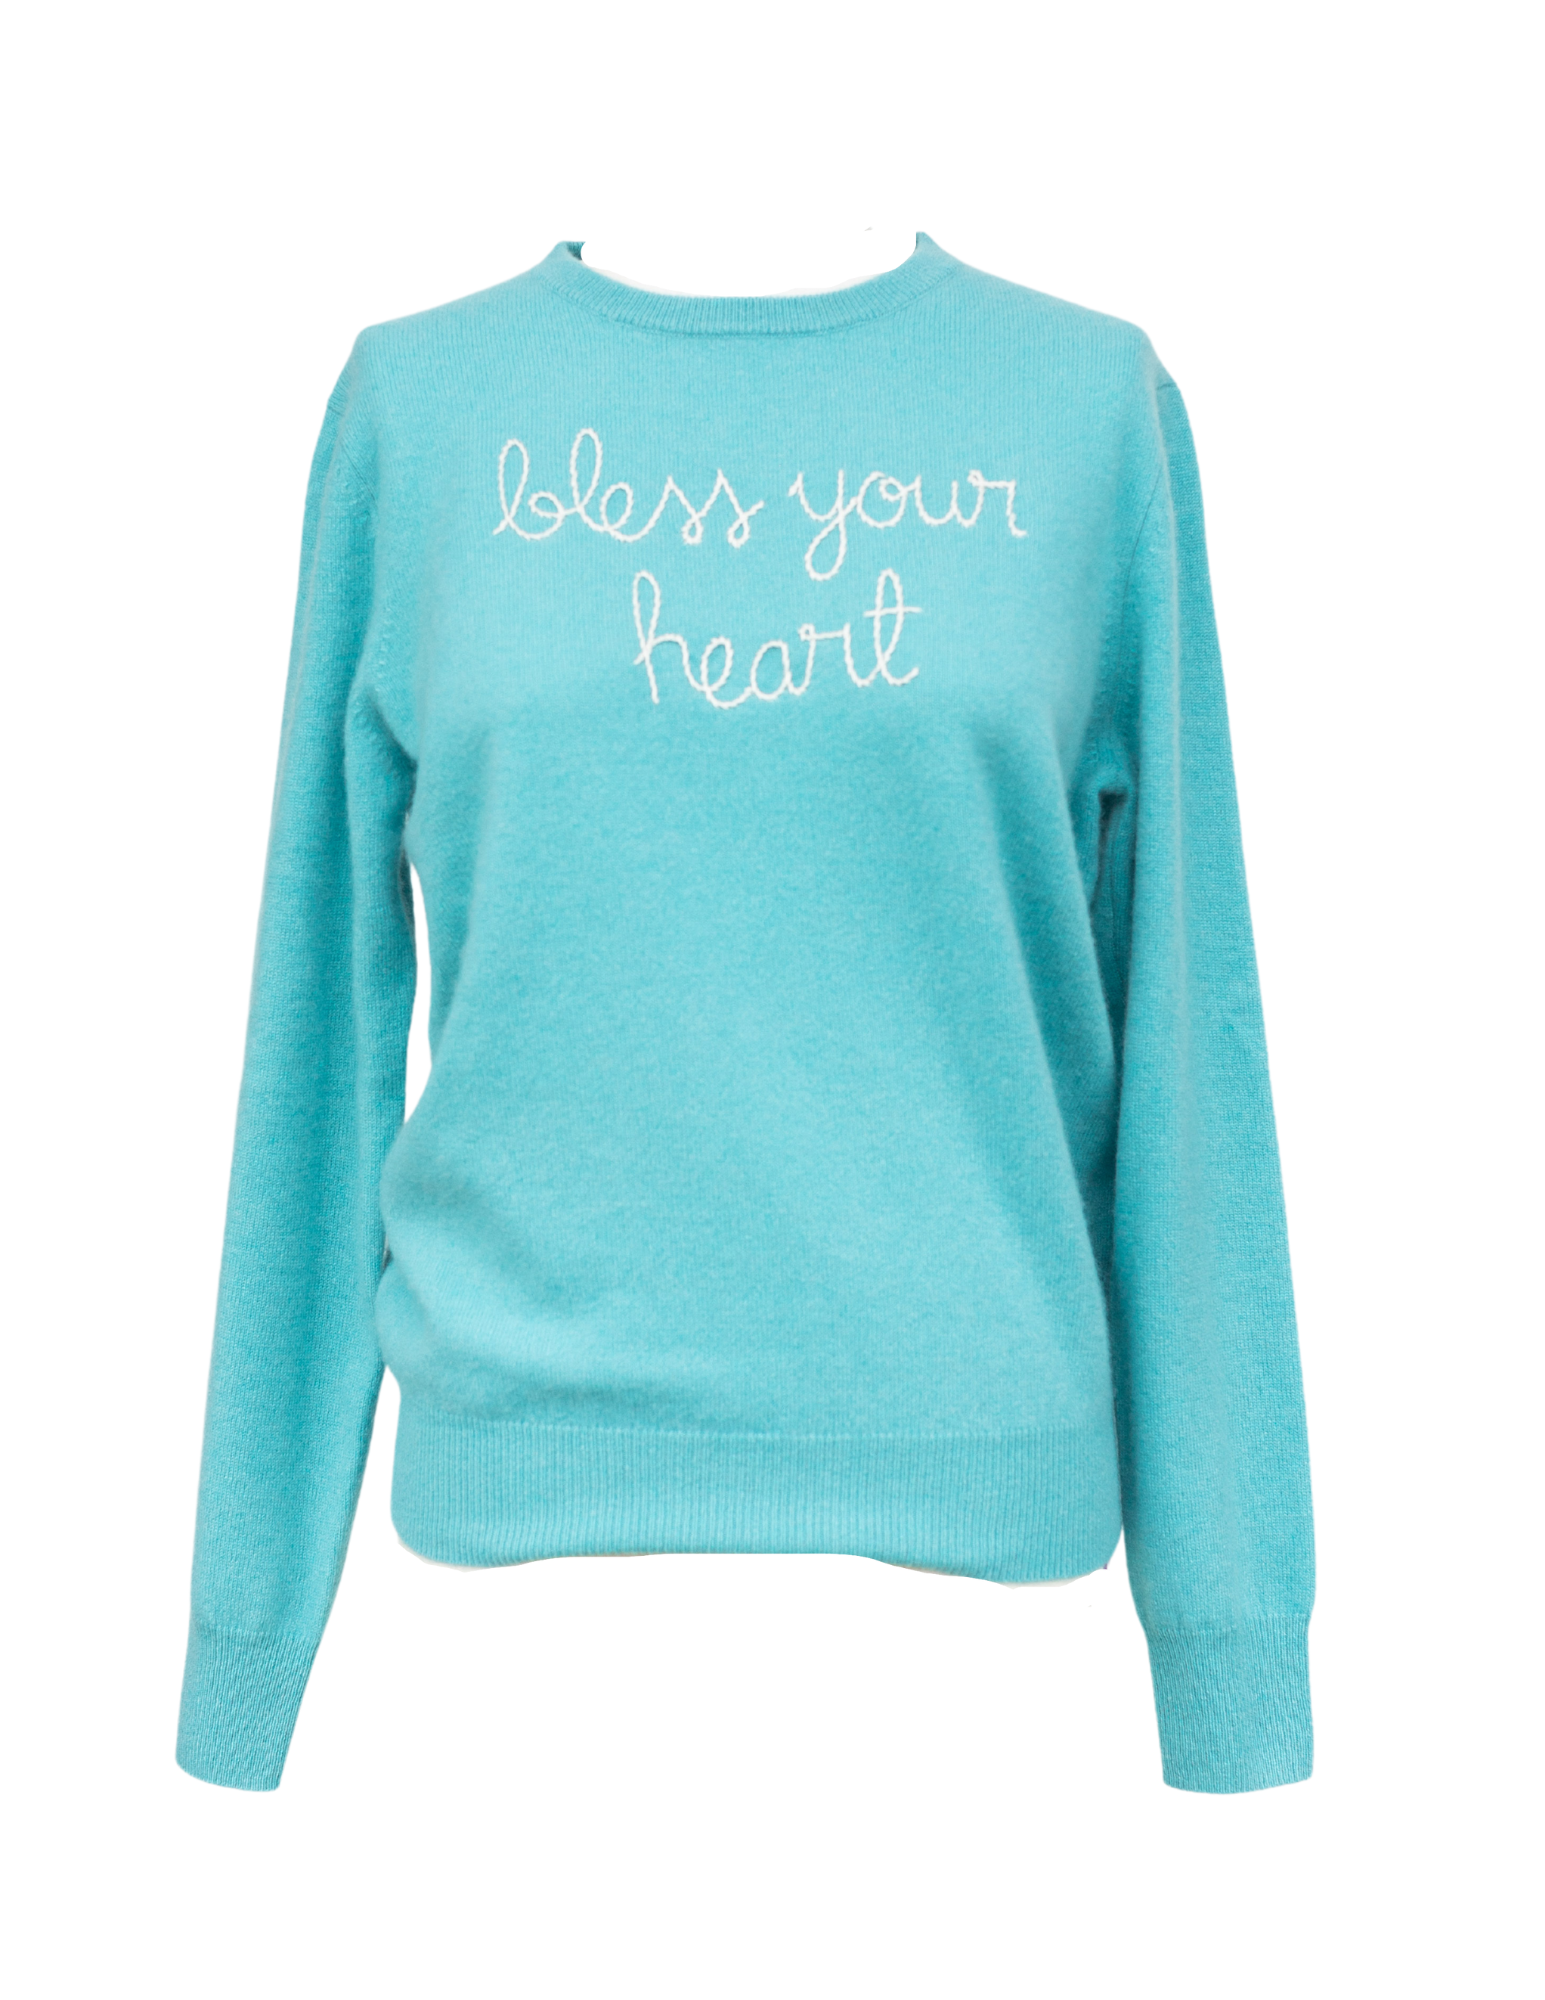 Bless Your Heart  L/S Crewneck - Teal